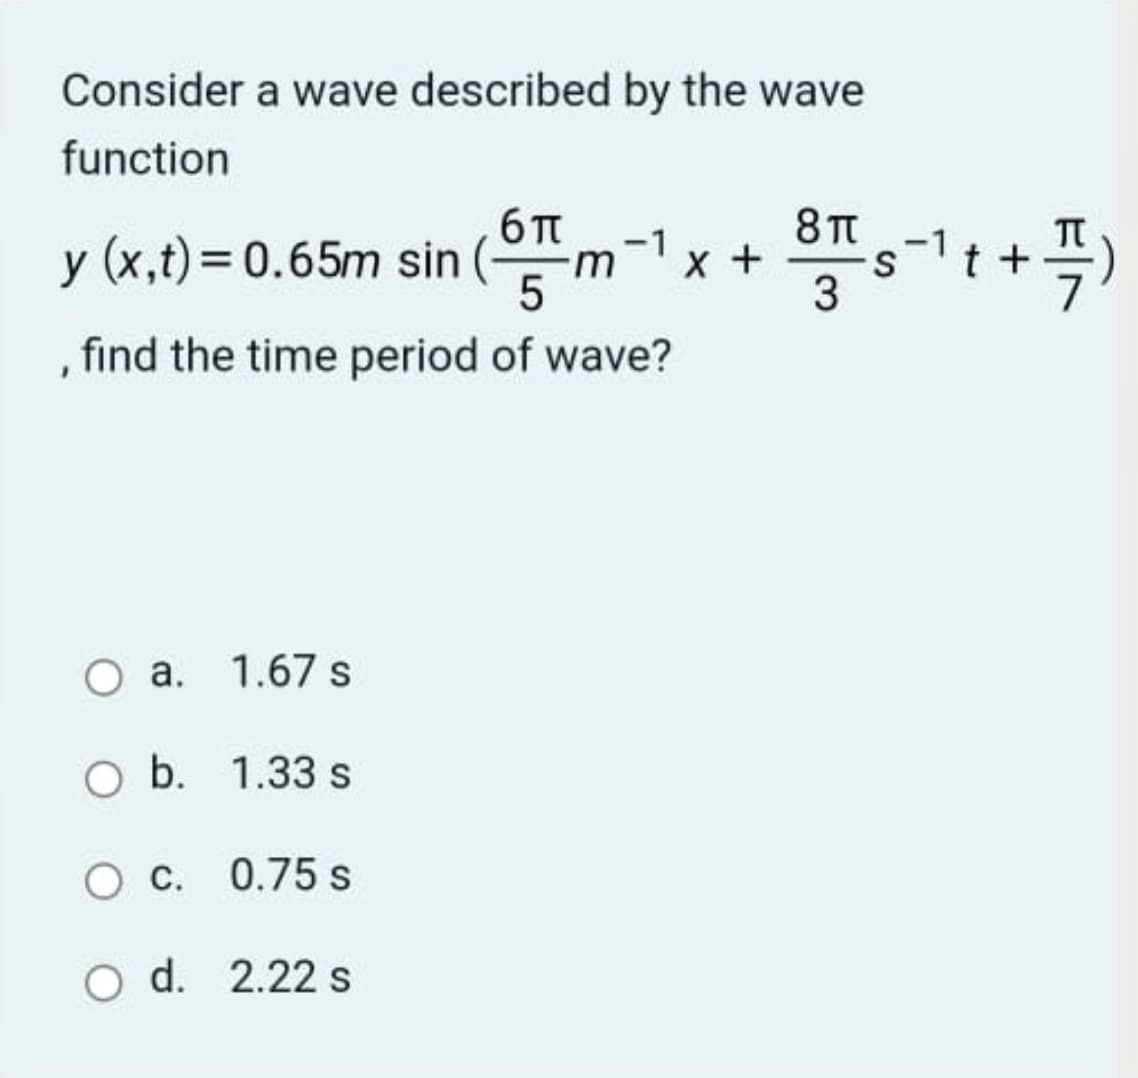 Consider a wave described by the wave
function
6 TT
y (x,t) = 0.65m sin (
(m-1
8TT
x +
3
find the time period of wave?
a. 1.67 s
O b. 1.33 s
C. 0.75 s
O d. 2.22 s
